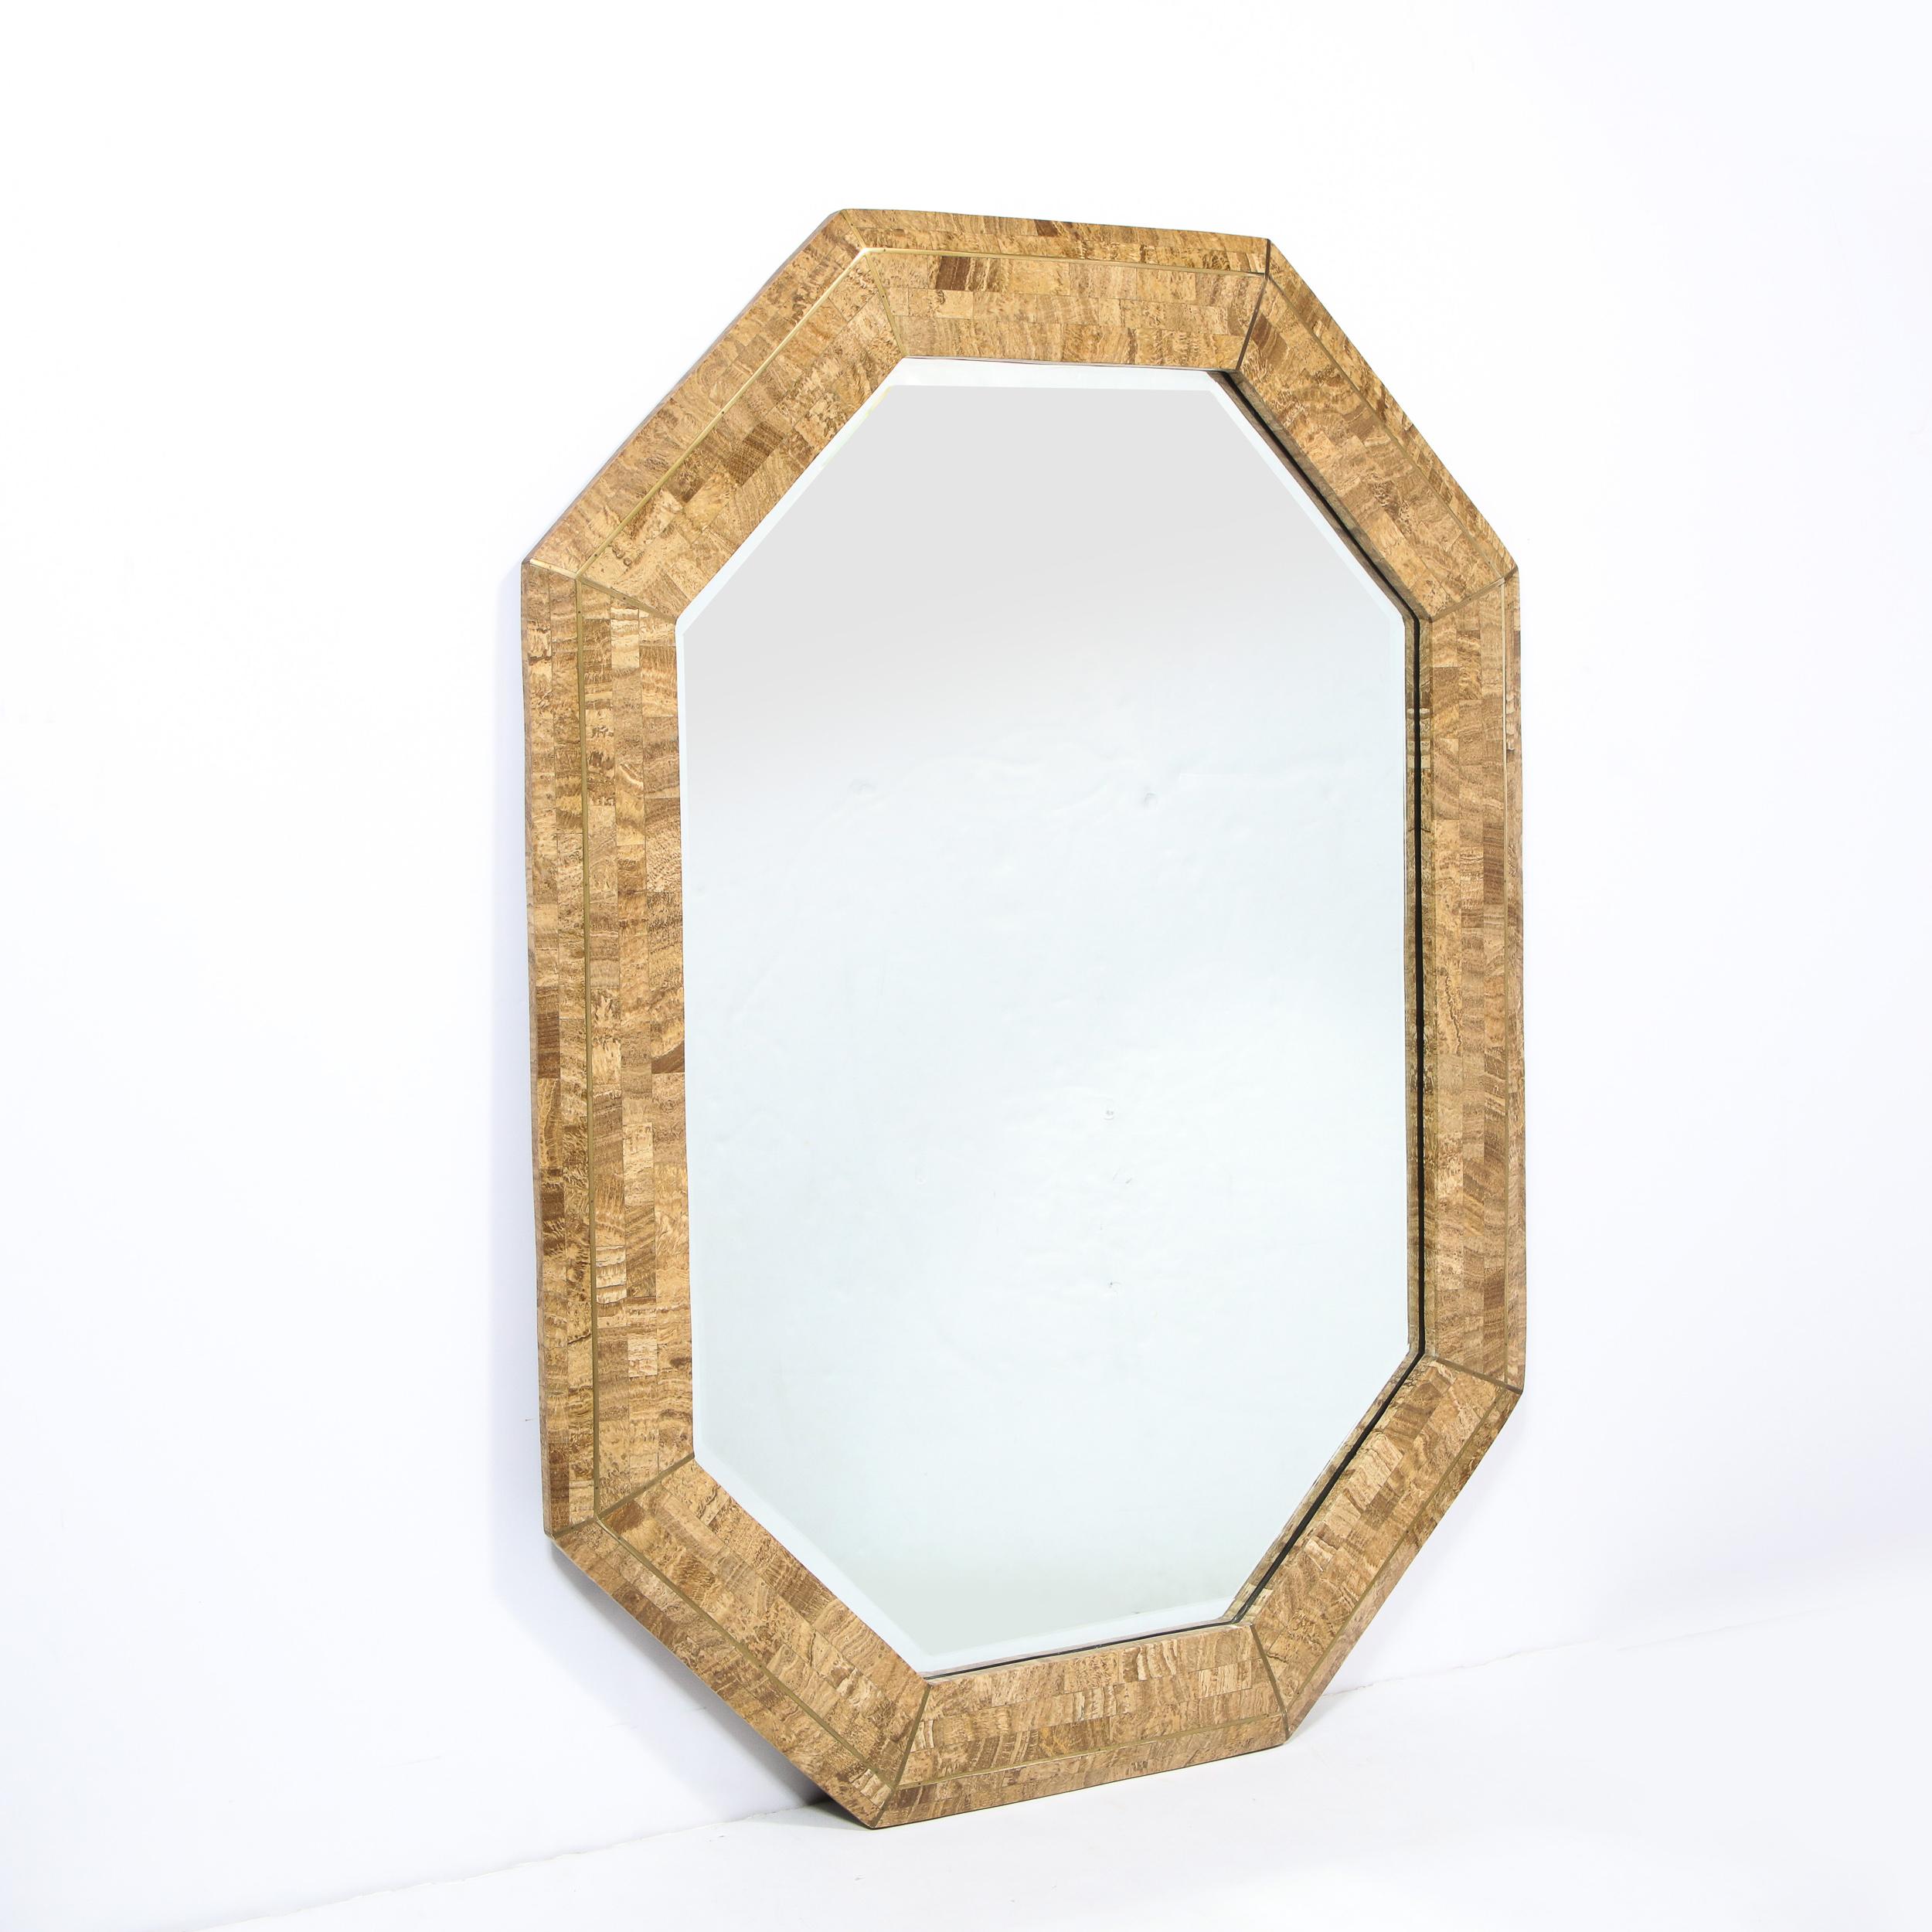 American Mid Century Octagonal Tesselated Stone & Brass Mirror Signed by Maitland Smith